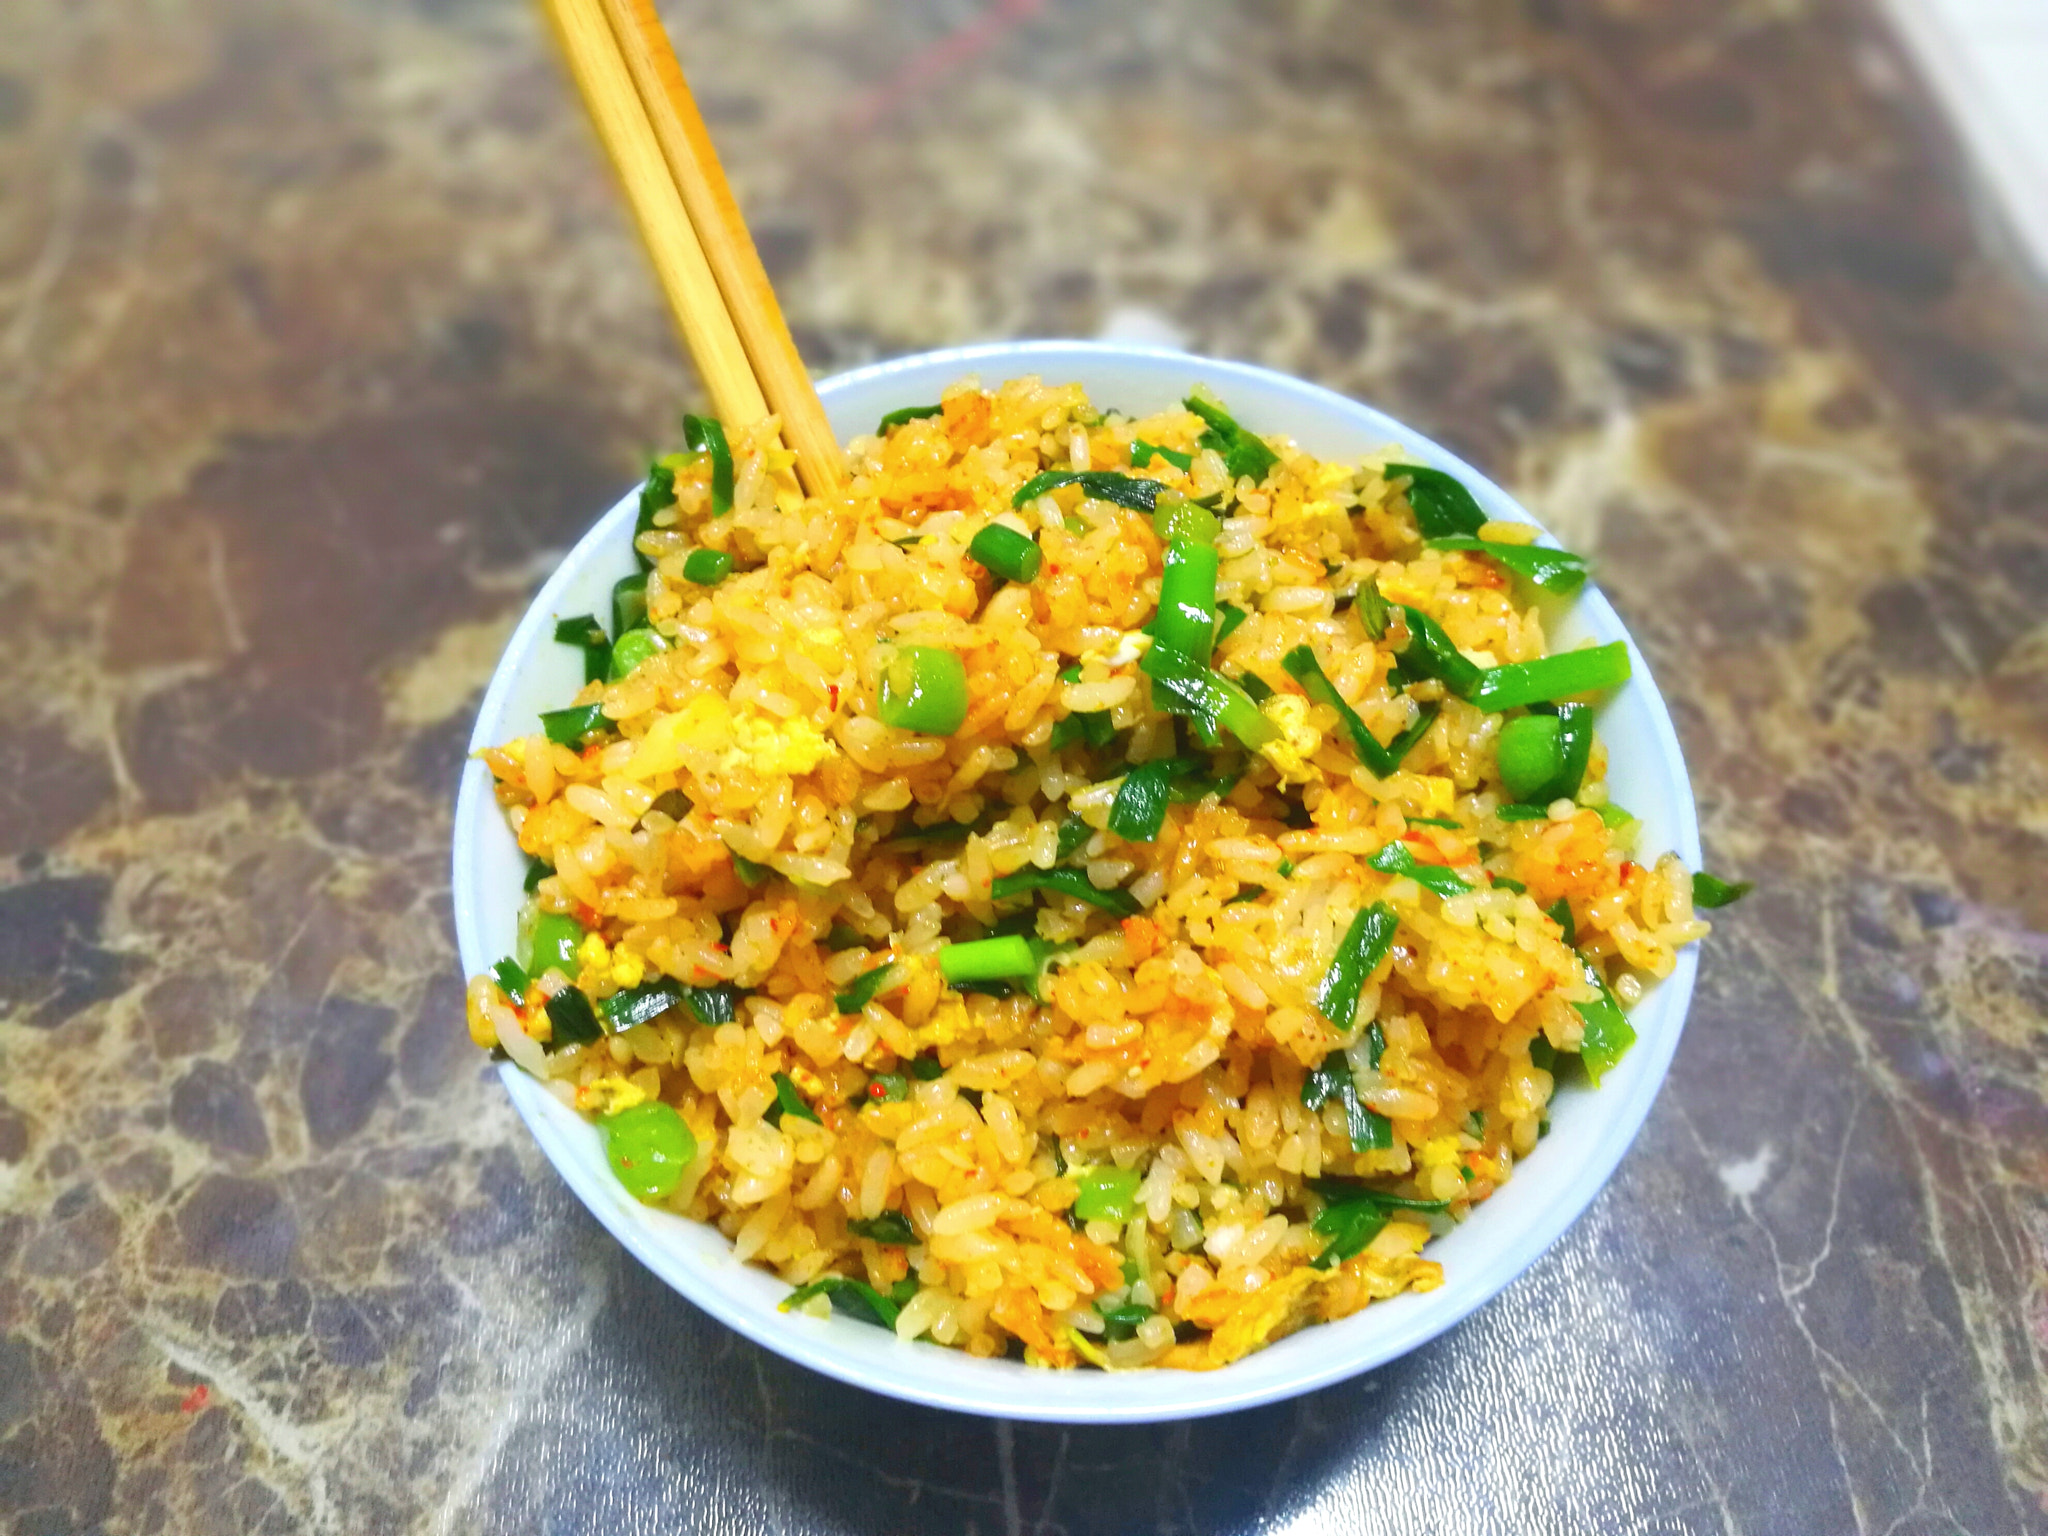 HUAWEI Honor V8 sample photo. Fried rice with egg photography